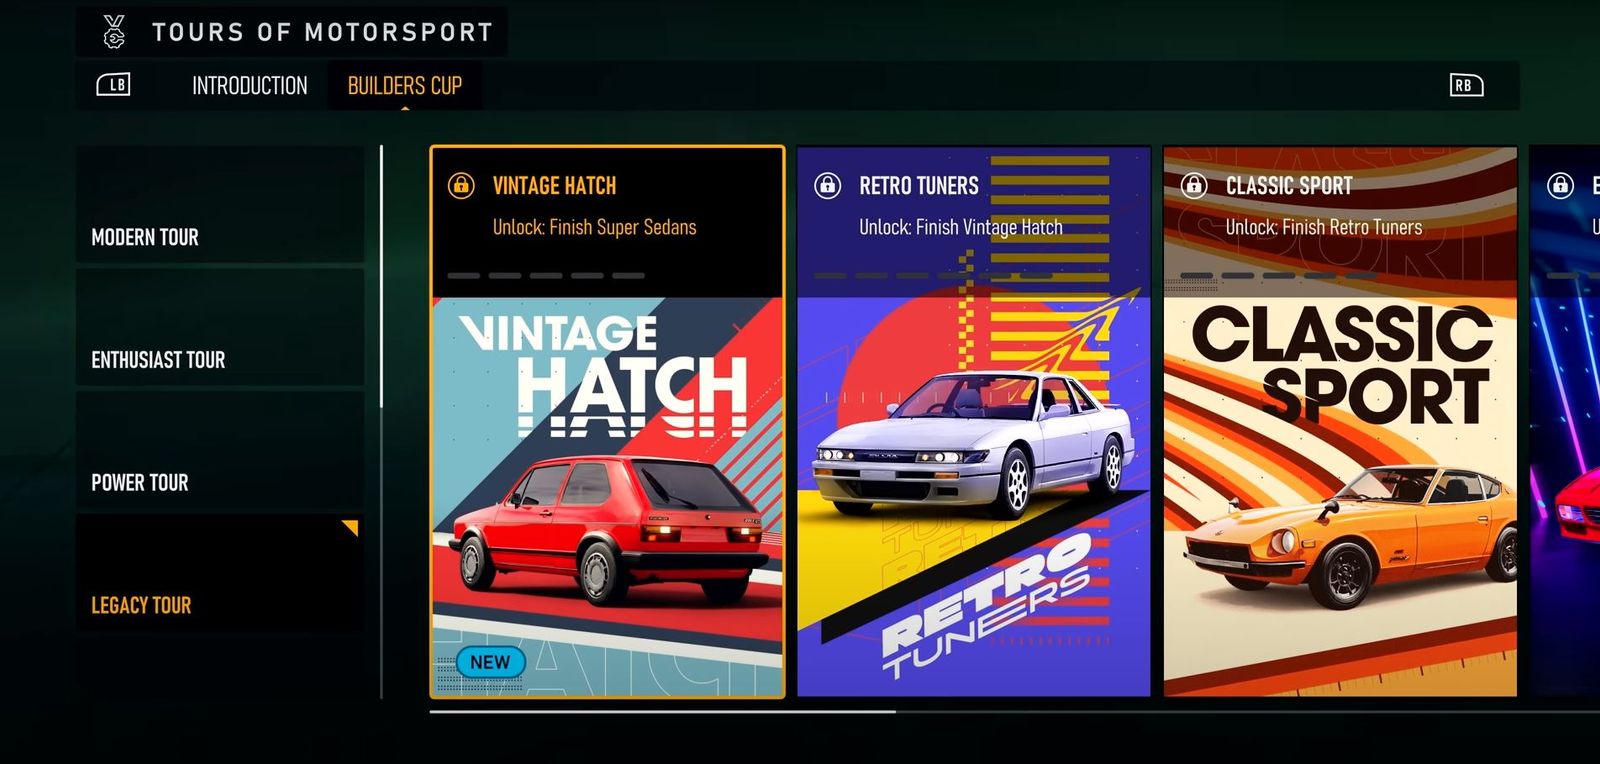 A screenshot of the Builders Cup in Forza Motorsport, showing a Vintage Hatch, Retro Tuners, and Classic Sport series to race in